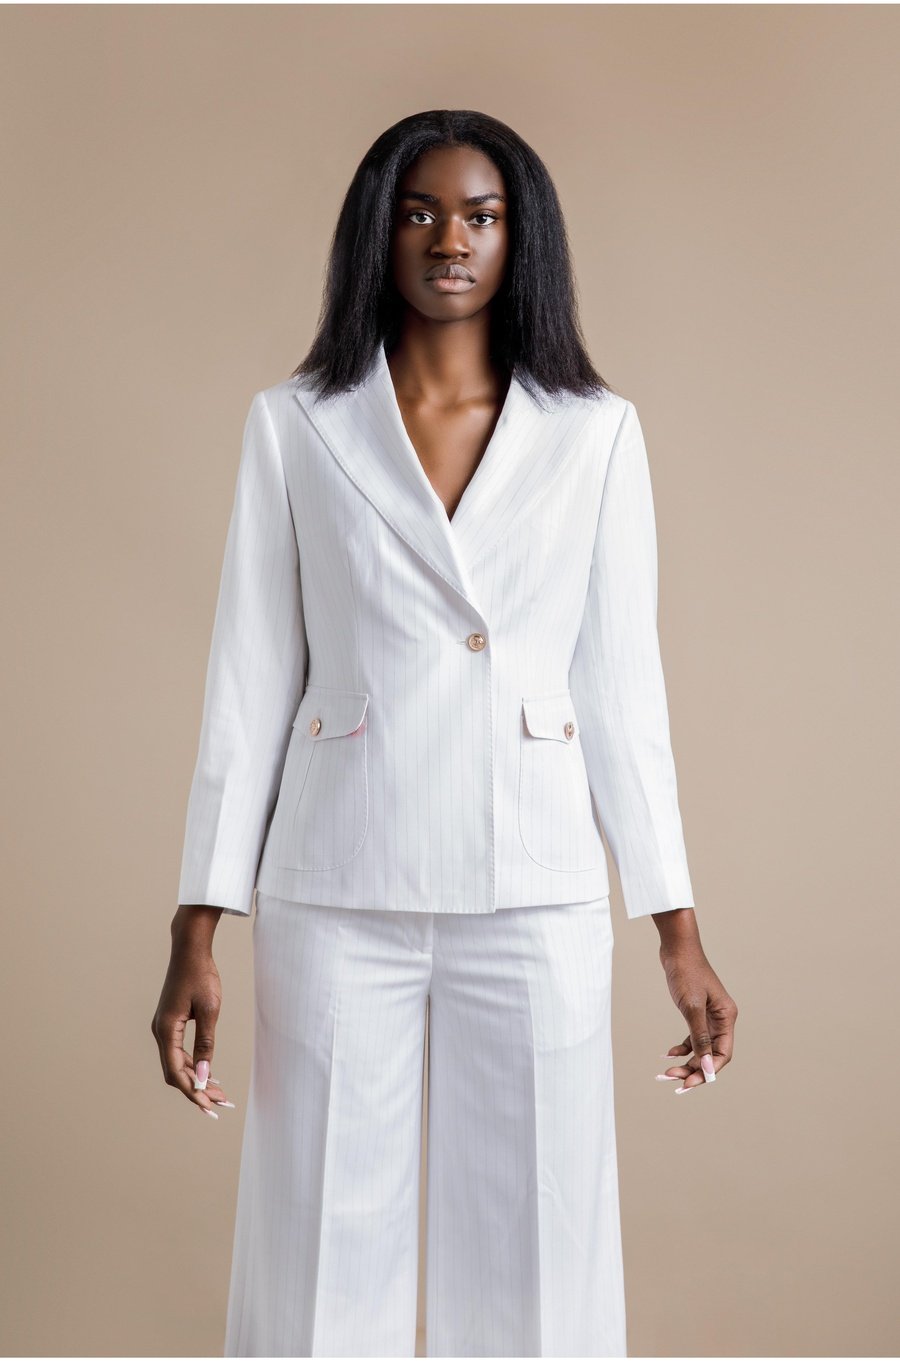 Elolo white gold pinstripe double-breasted suit. Crafted in soft poly wool and decorated with crown gold buttons